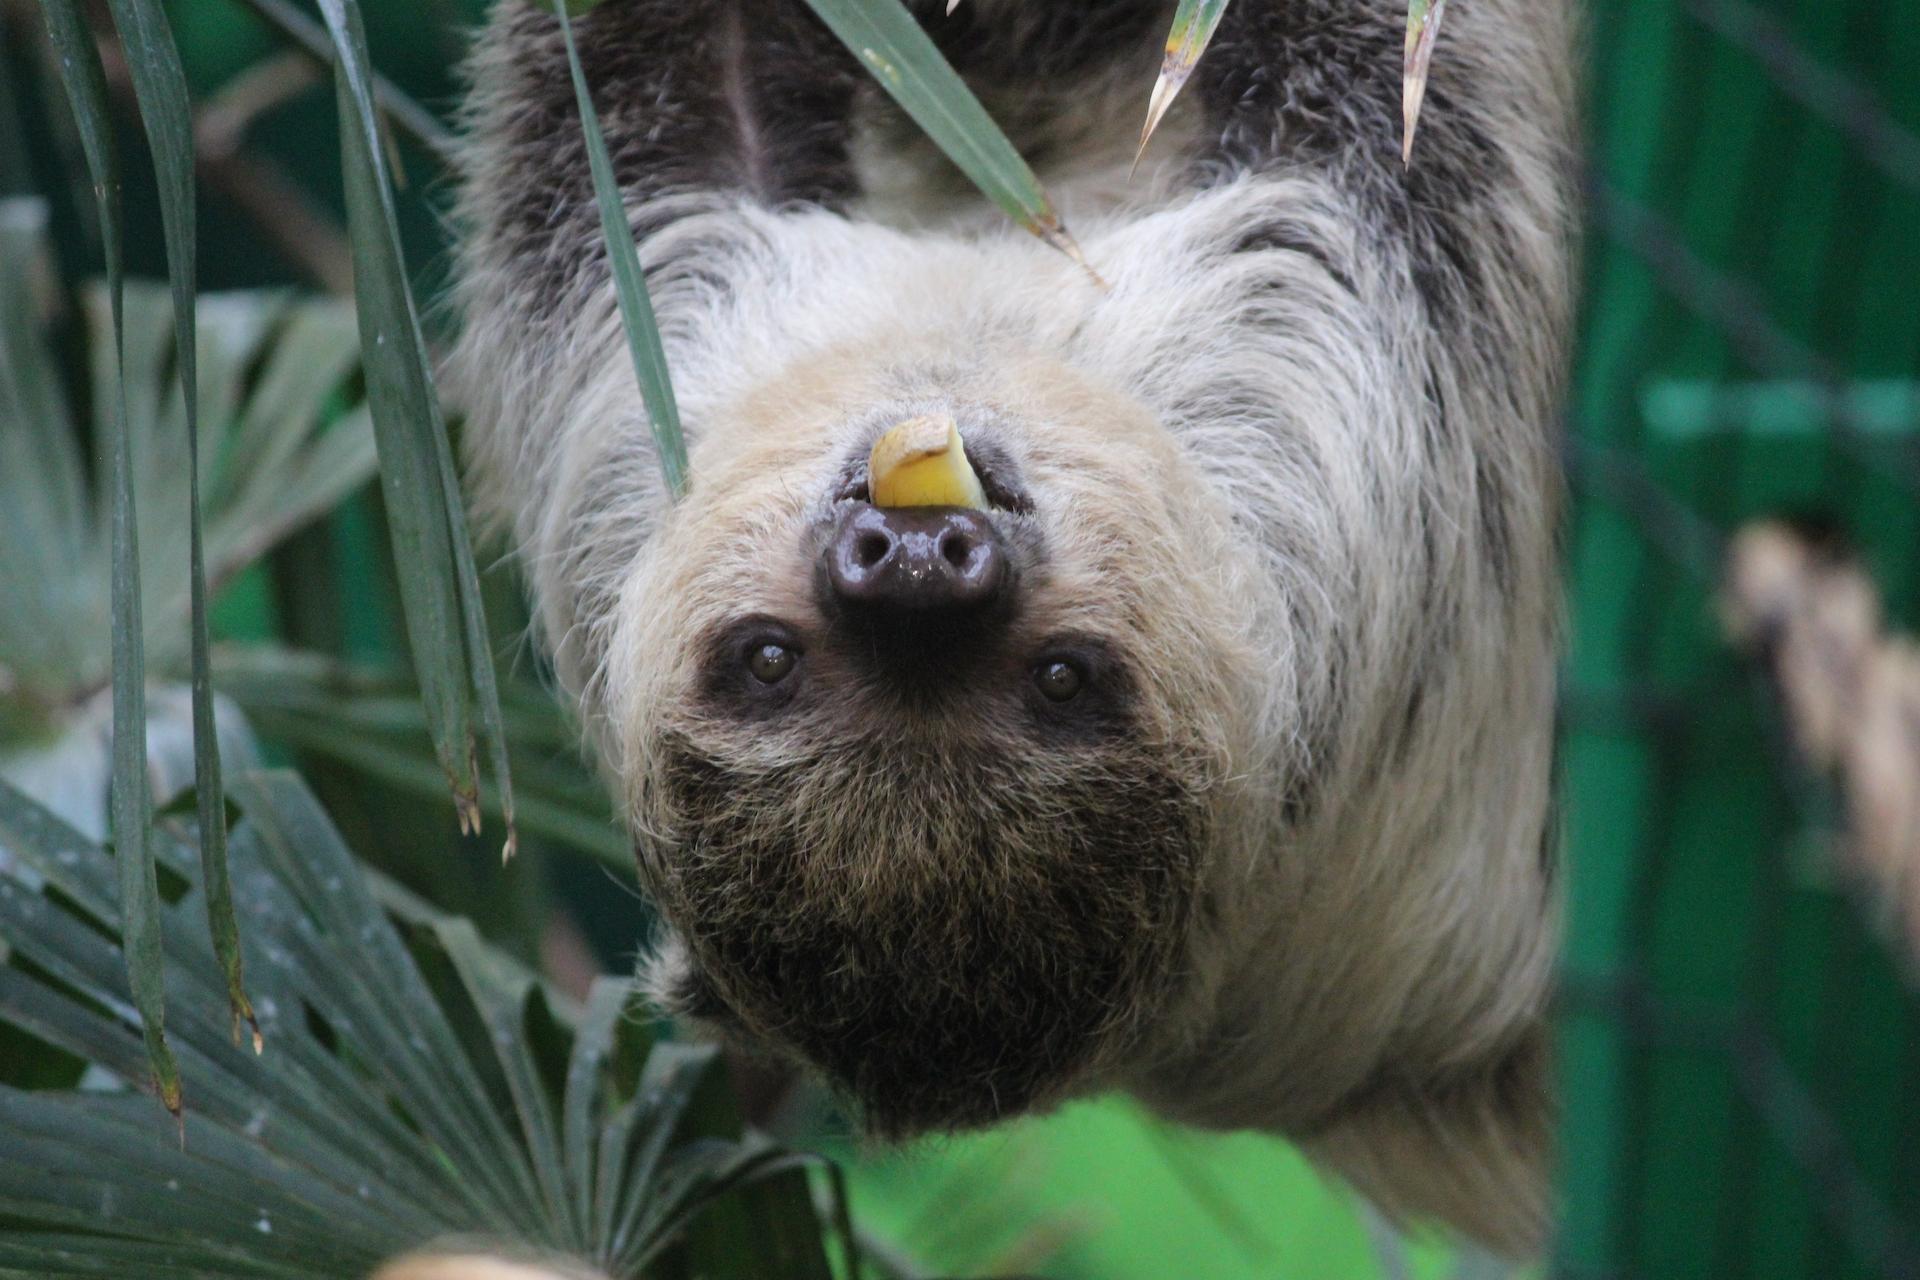 Sloth Feira hanging upside down with fruit in her mouth eye contact

Image: HOLLIE WATSON 2021